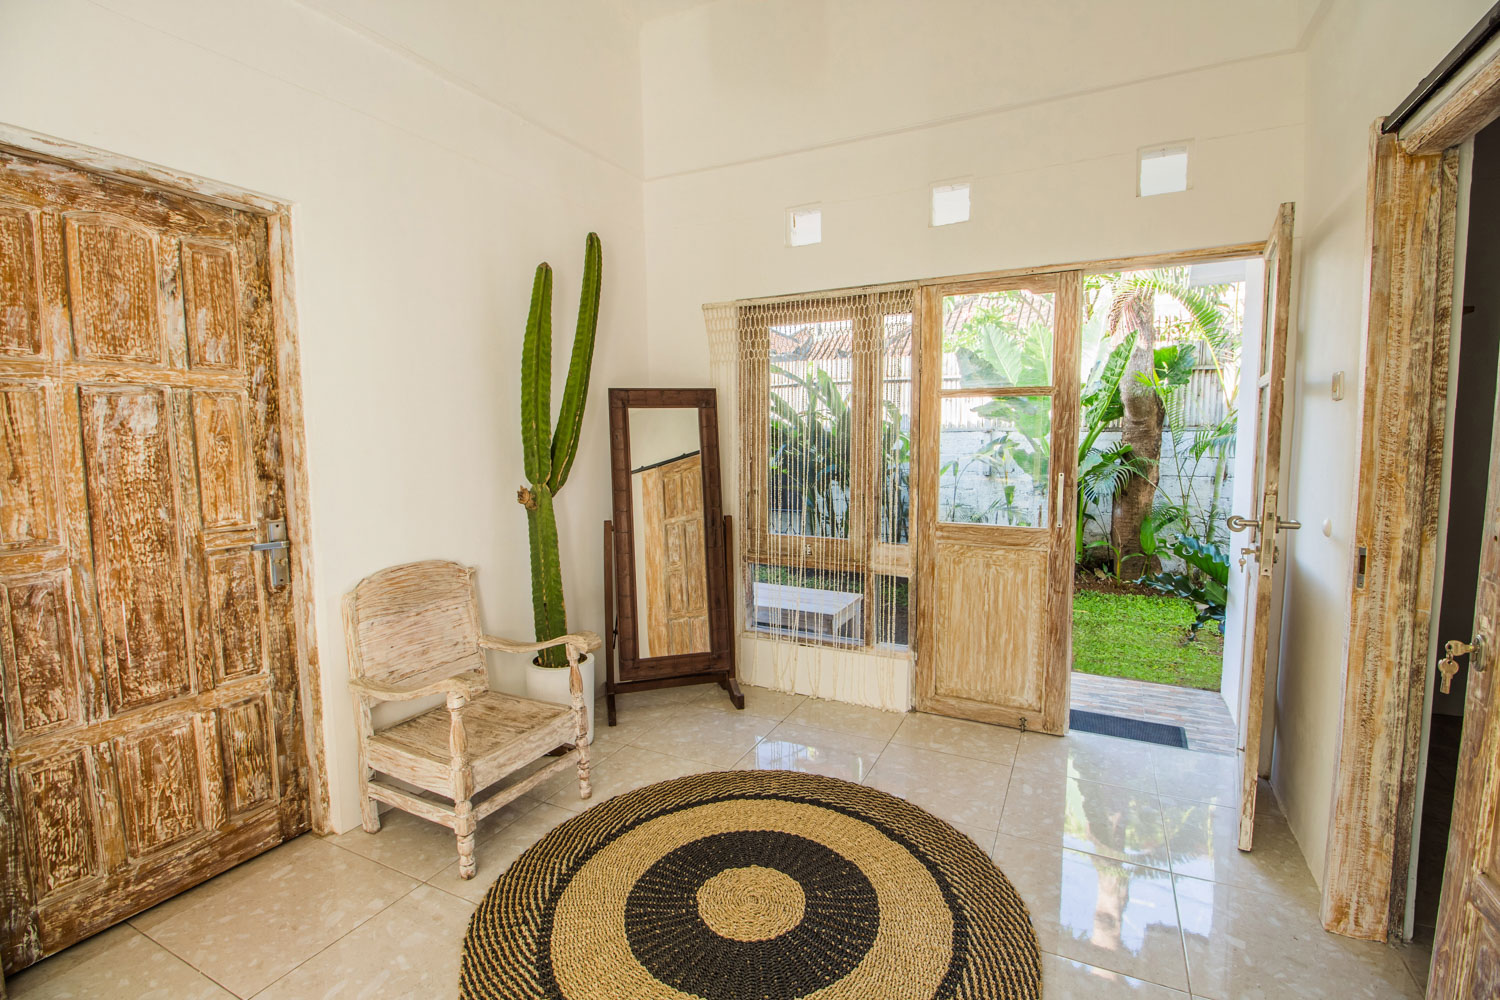 Rustic 2 bedroom homey villa in central Berawa, Canggu with private pool. Short distance to the beach, and convenient access to restaurants and shops